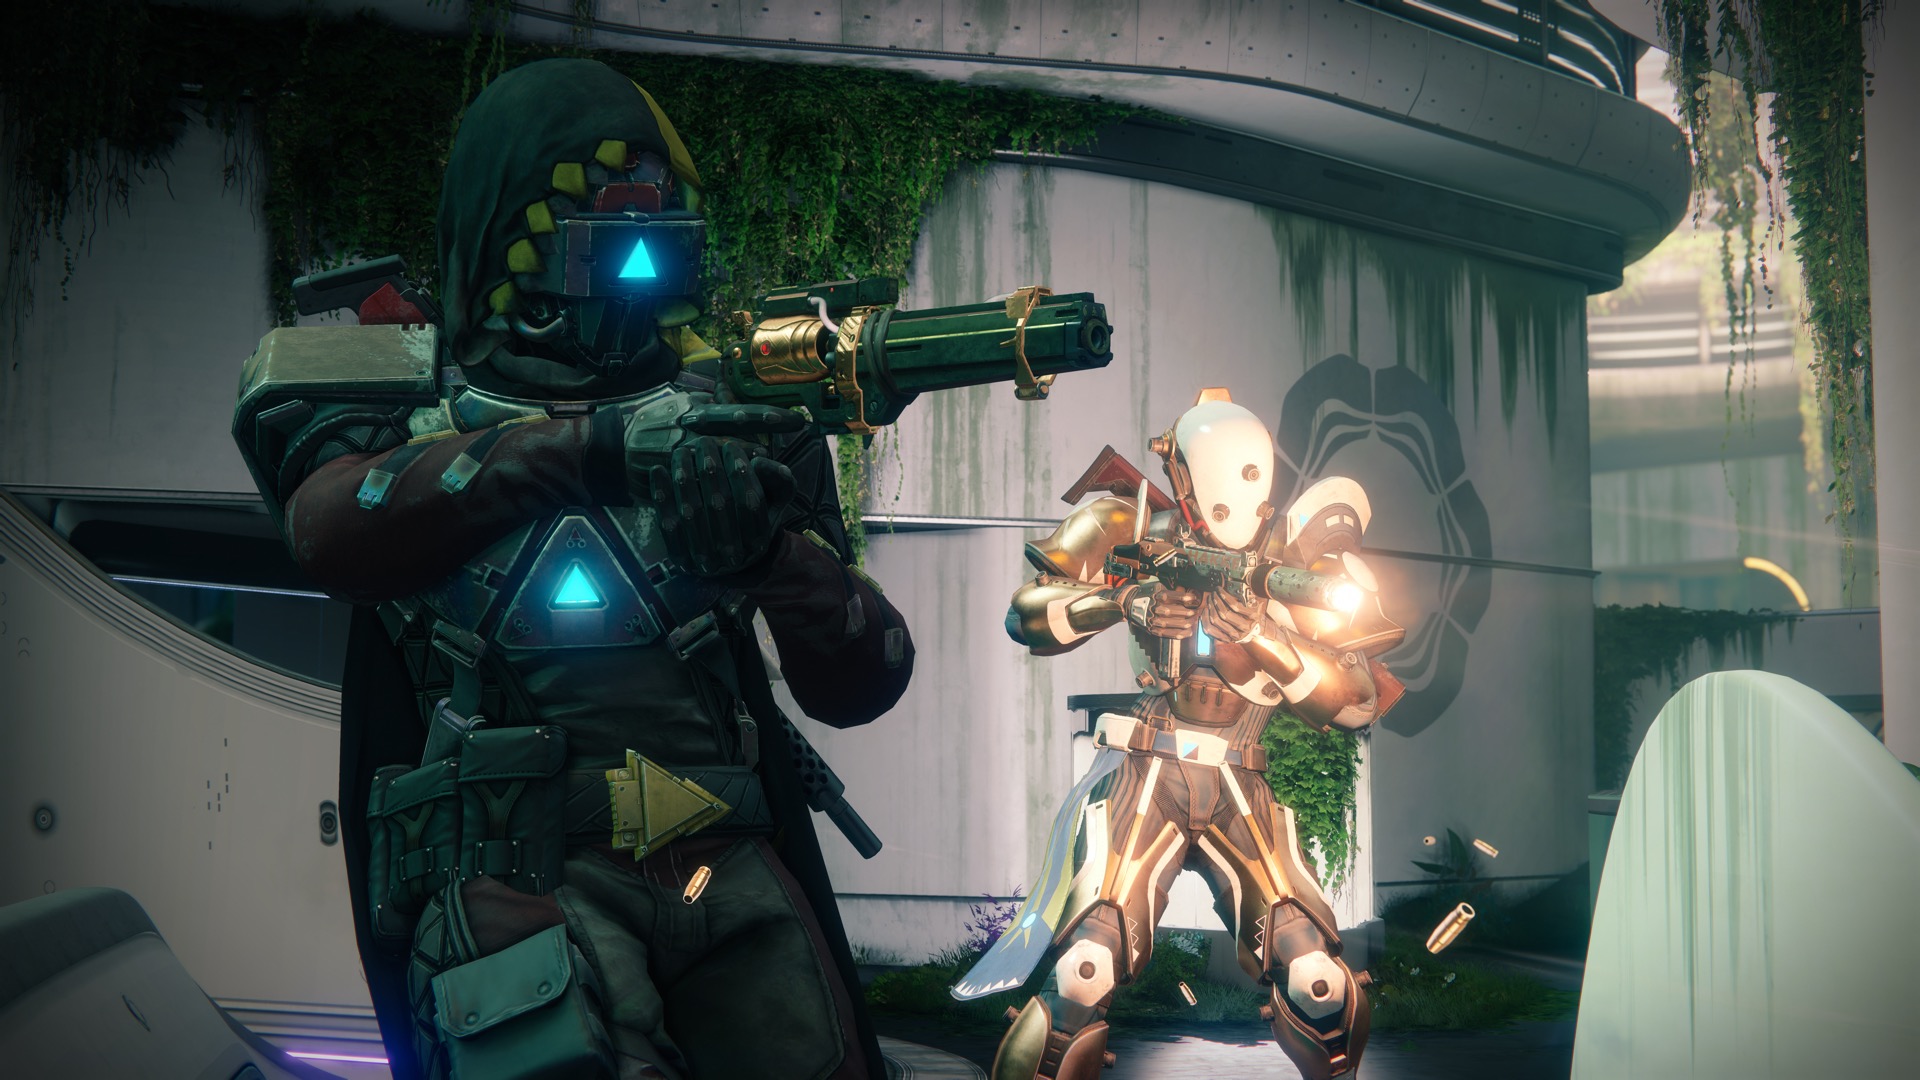 Two players in elaborate armor hold weapons in Destiny 2